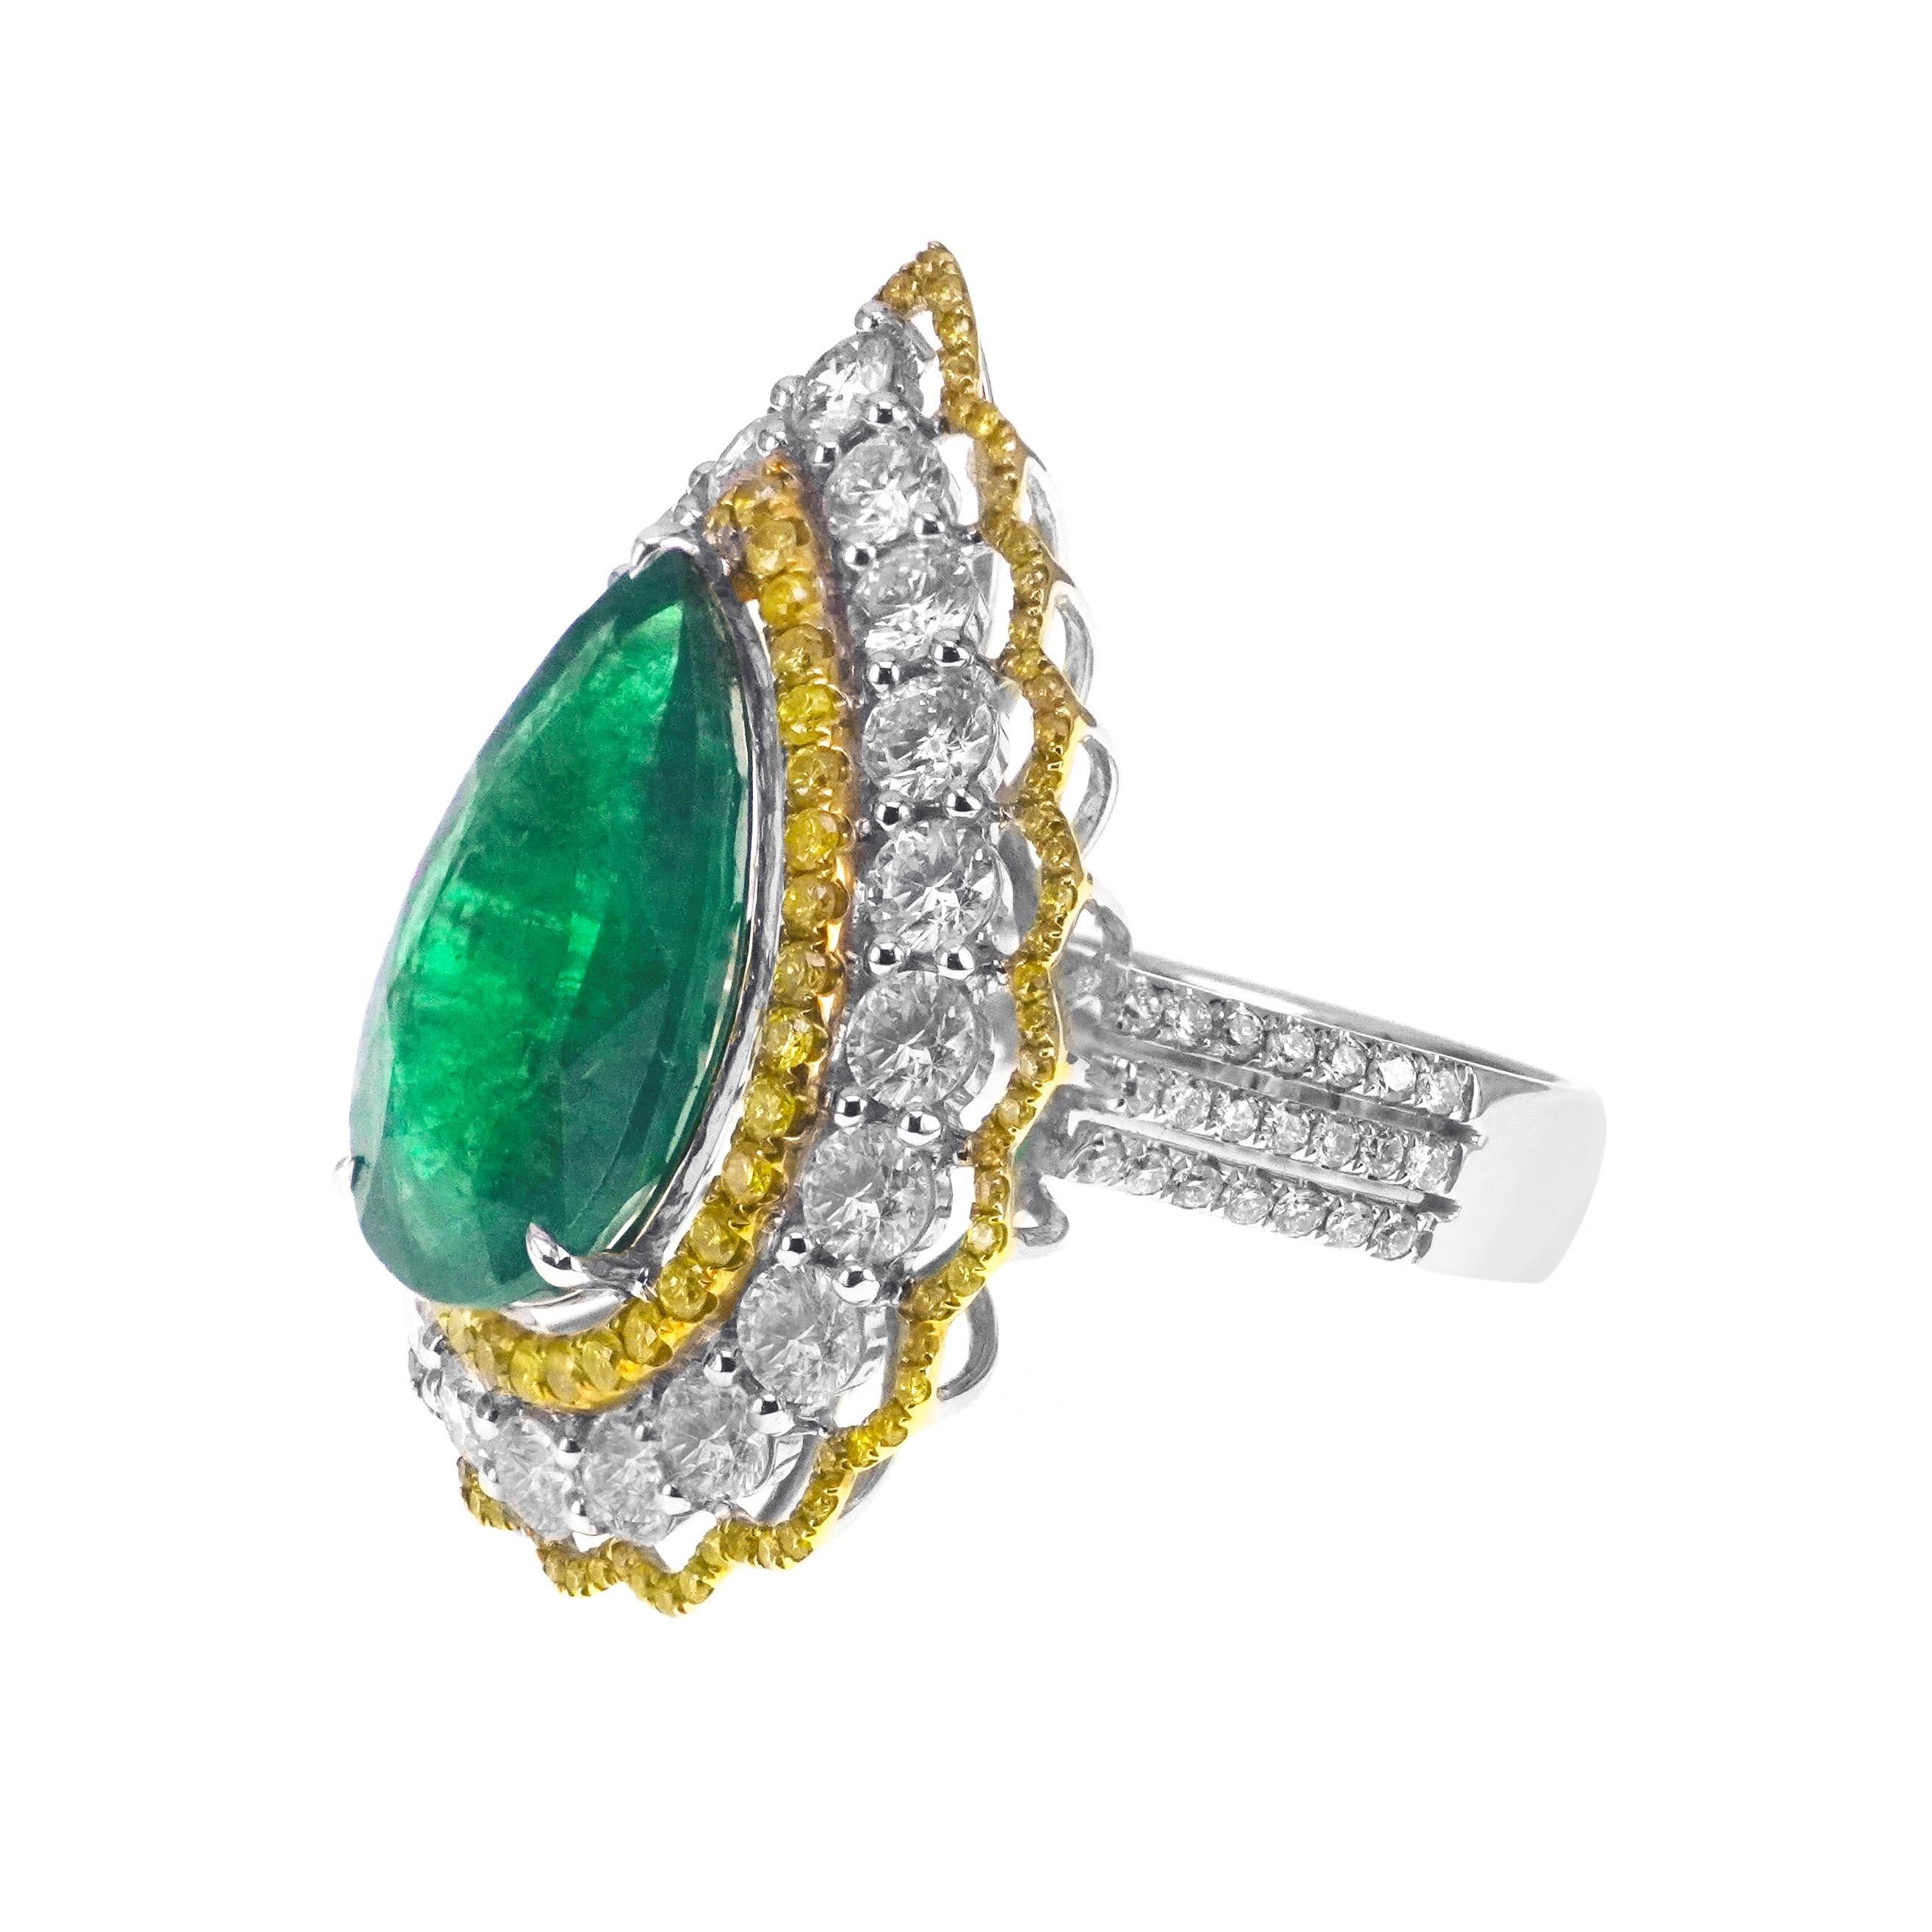 A sumptuous soothing green emerald weighing 5.67 carat is set with 0.62 carat of vivid yellow round brilliant diamond. The ring is also accented by 2.11 carat of white round brilliant diamond.  The details of the diamond are mentioned below:
Color: